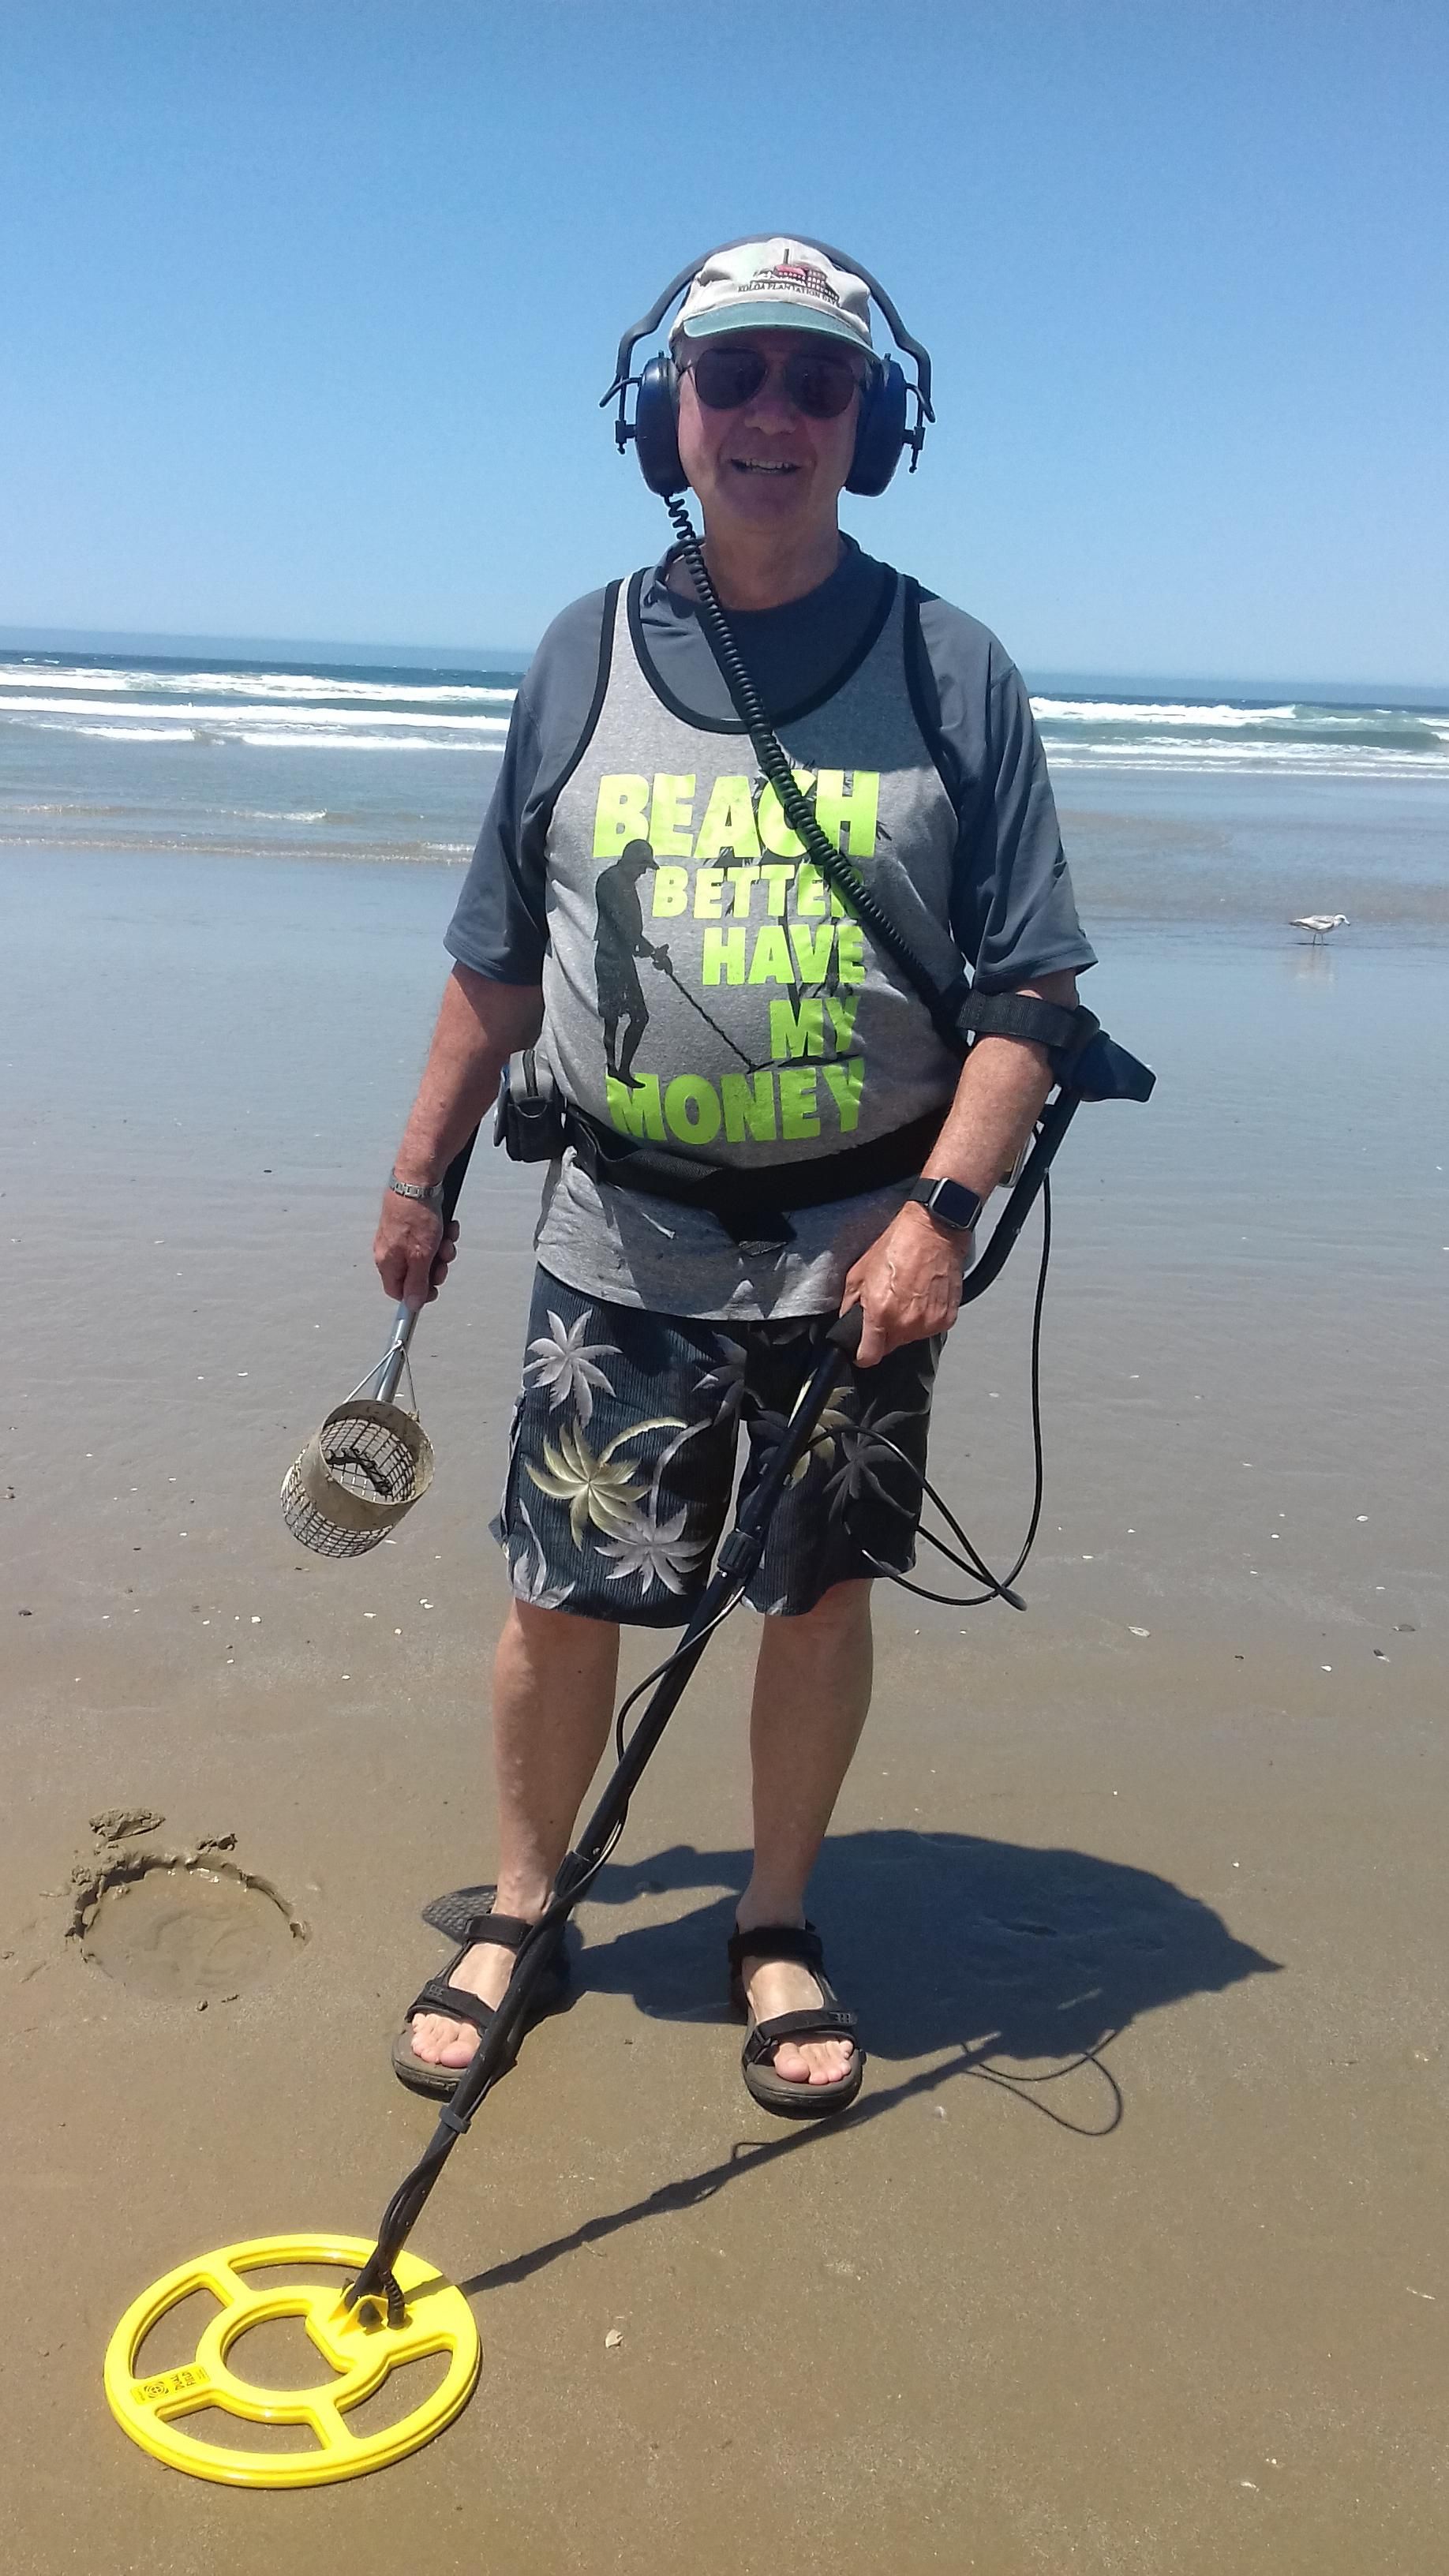 Saw this guy on the beach with a metal detector. He said his grandkids bought him this shirt